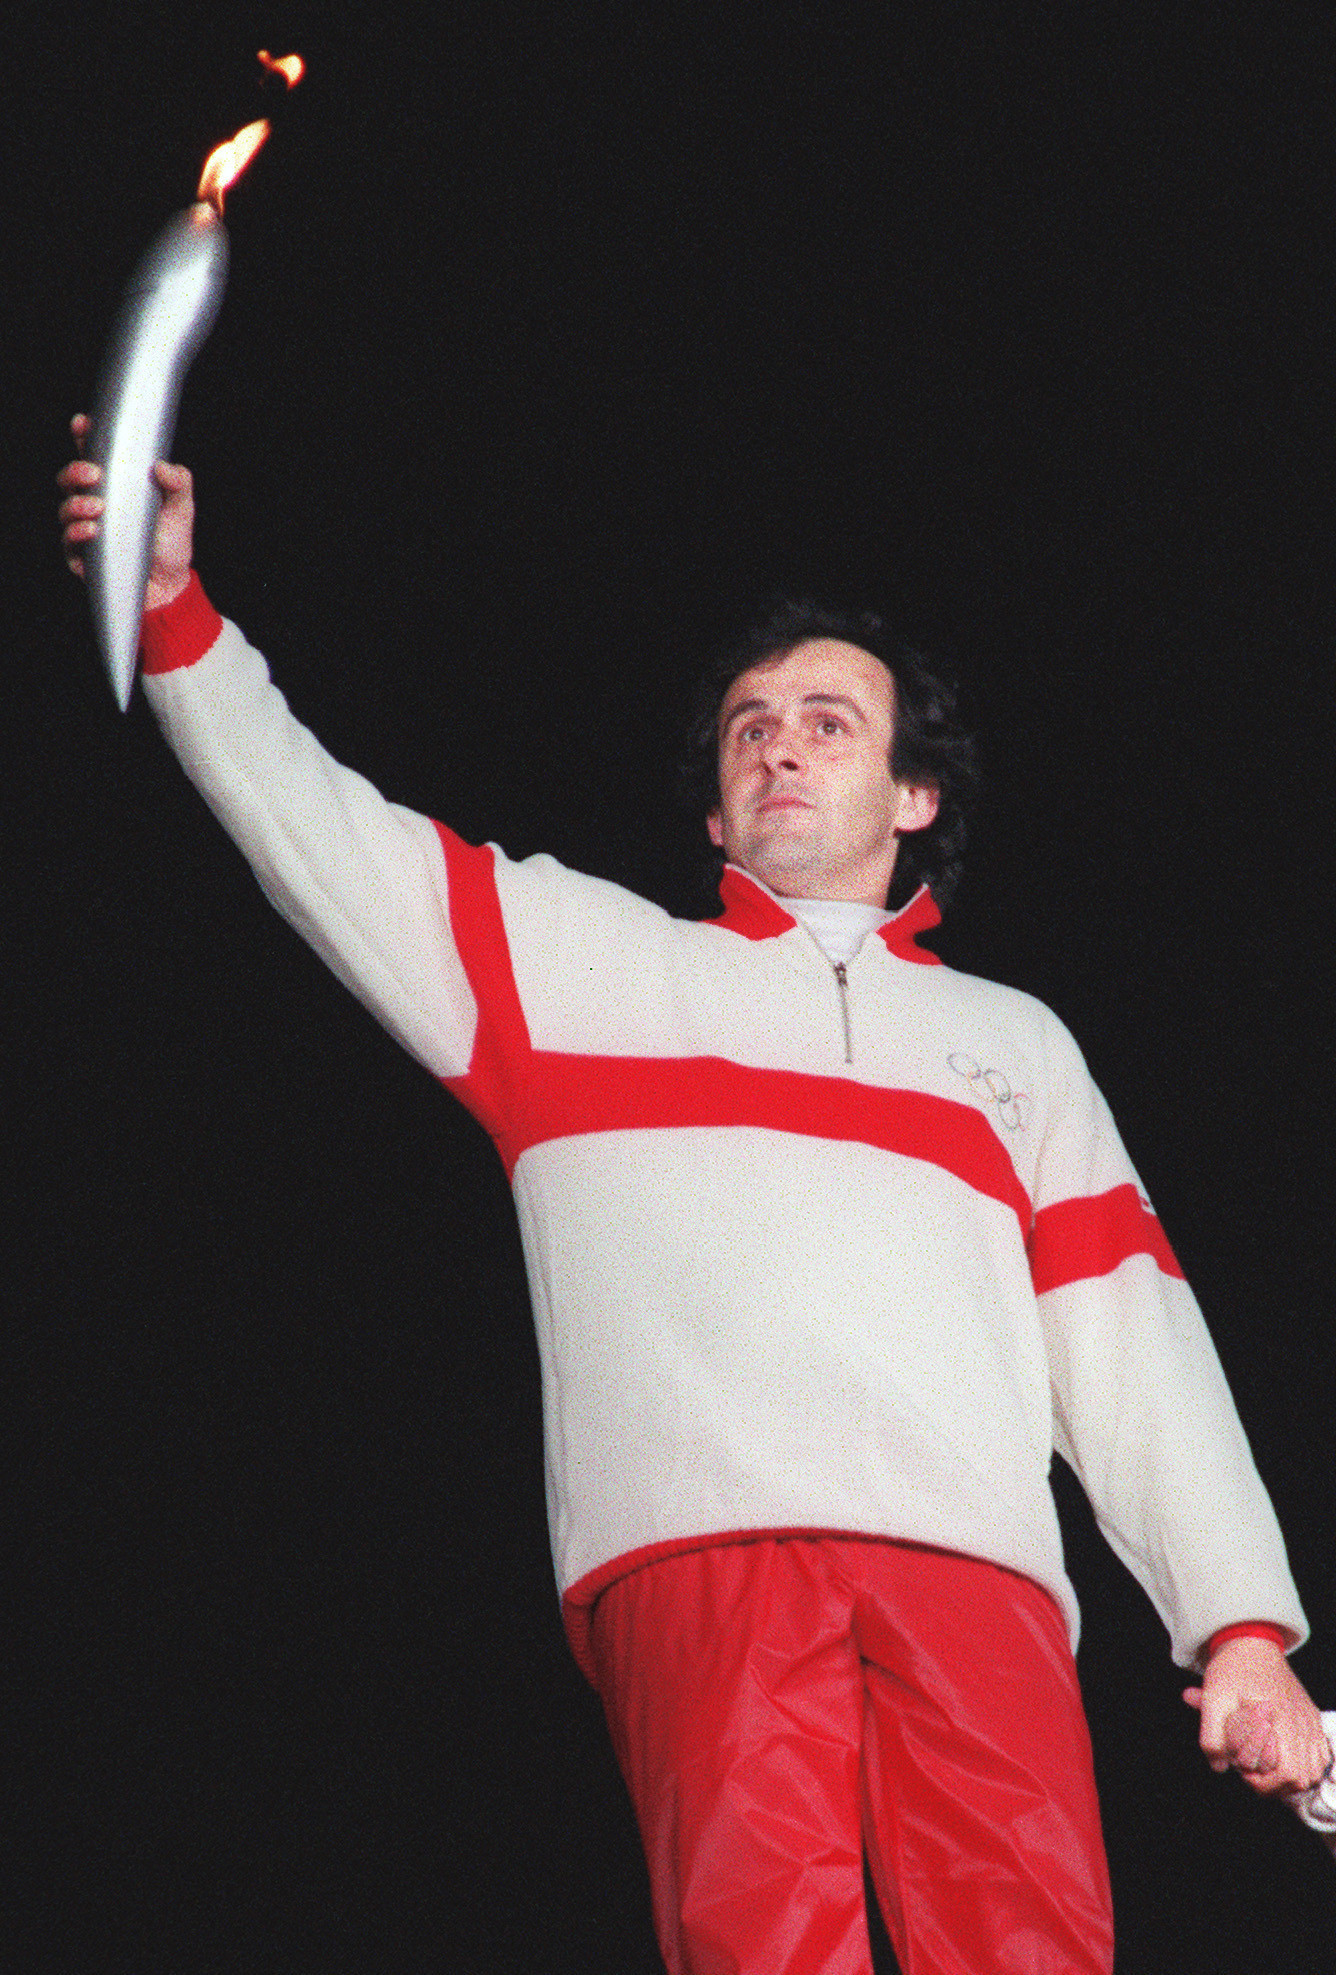 Michel Platini brought the Olympic Flame into the Albertville Stadium in 1992 ©Getty Images